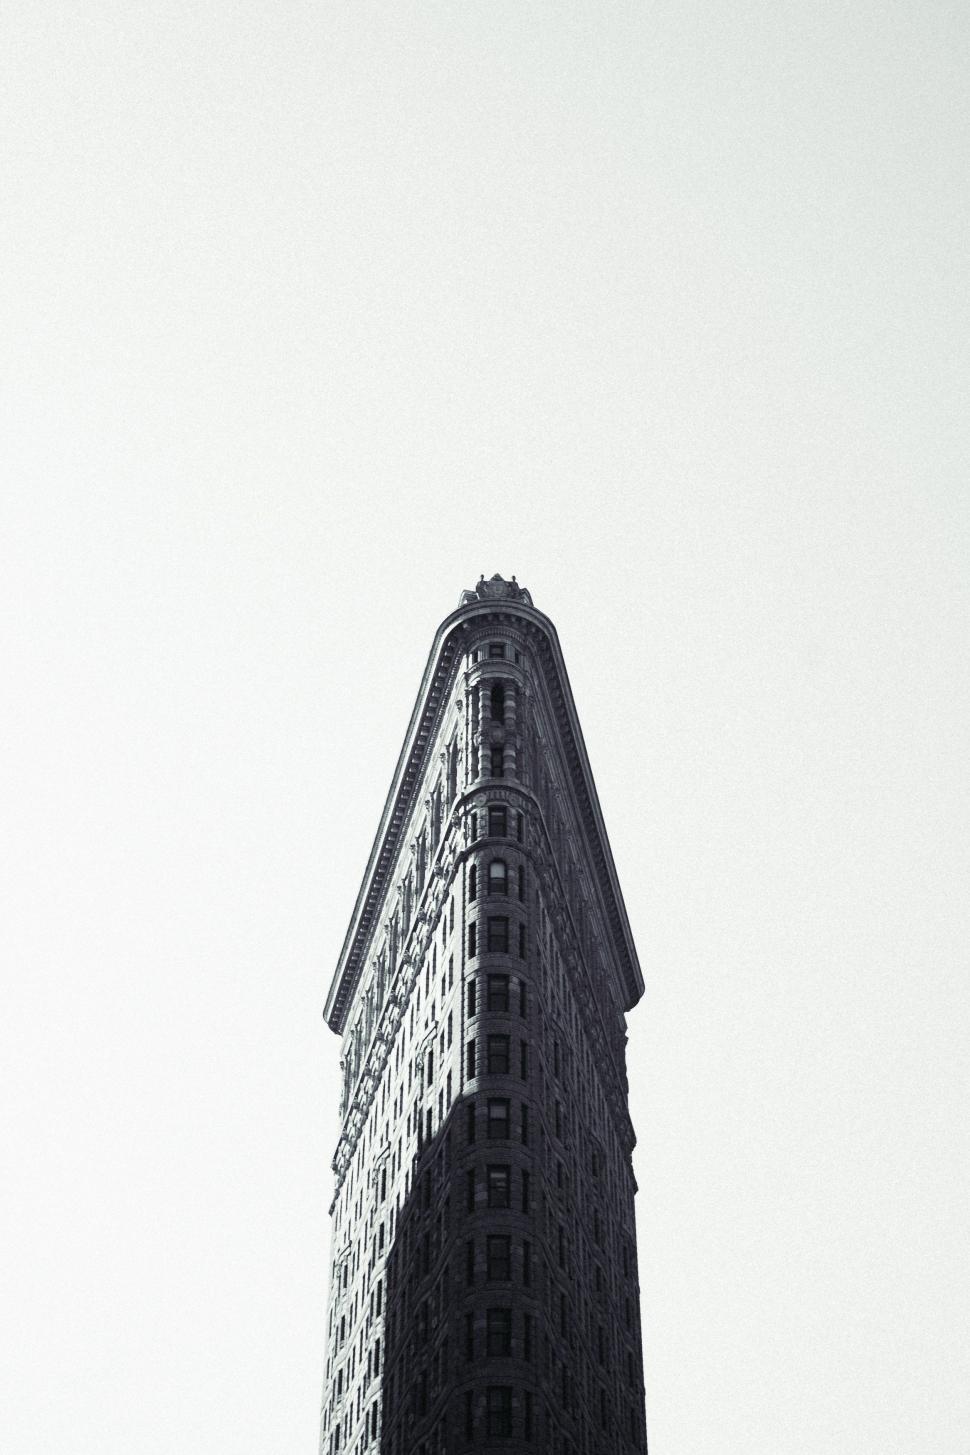 Free Image of Tall Black and White Building in Urban Landscape 